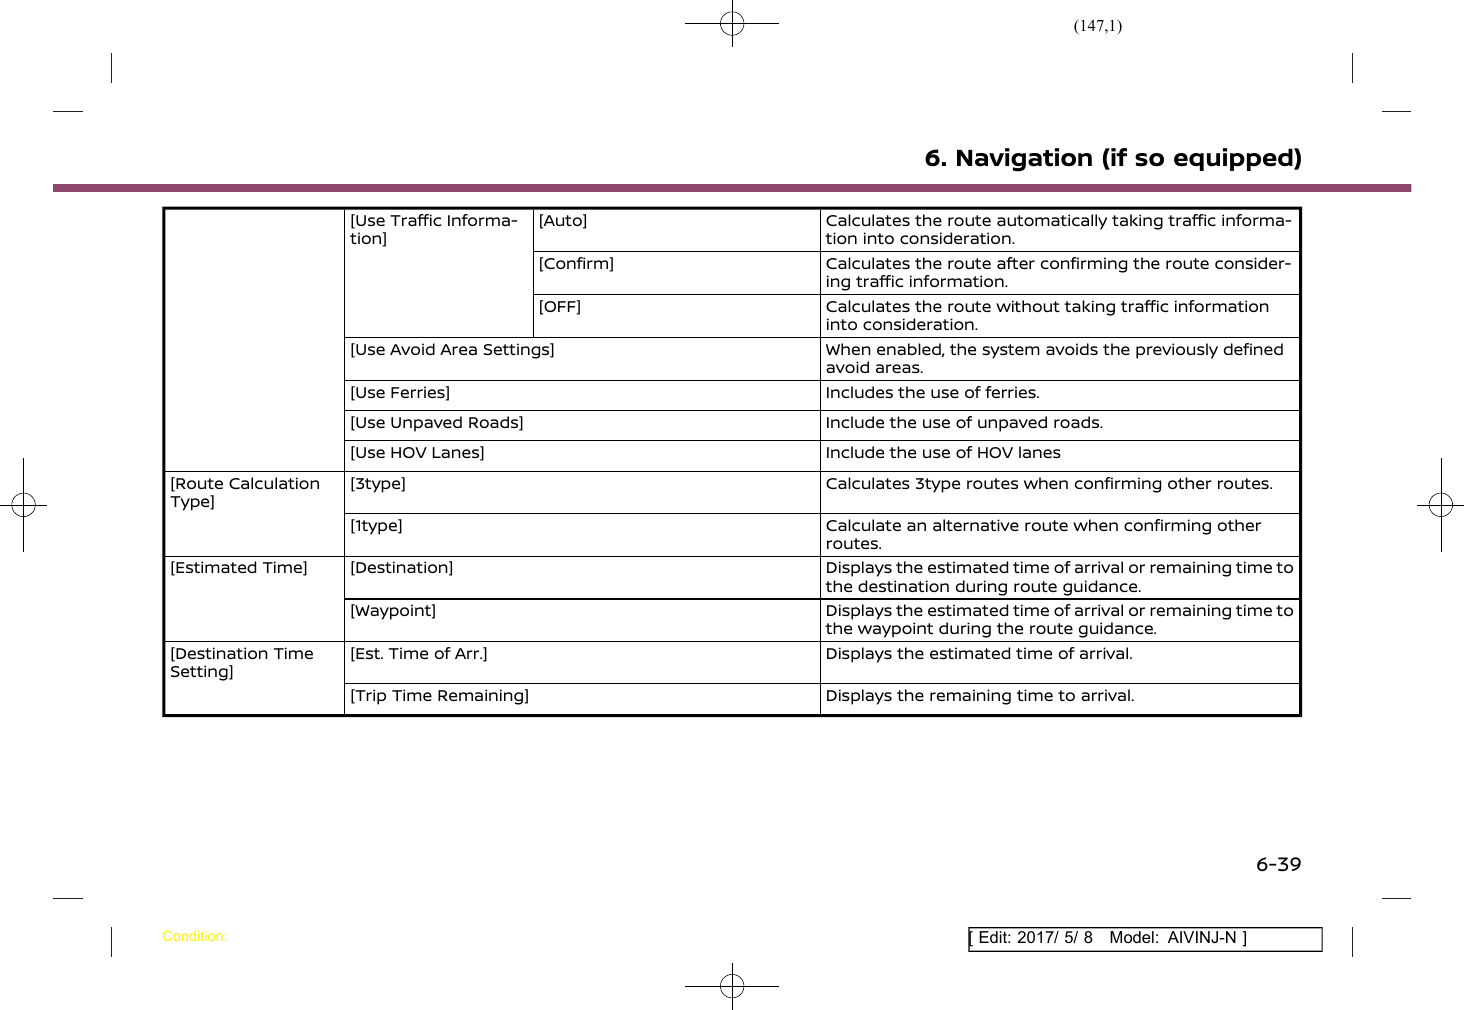 Page 147 of Robert Bosch Car Multimedia AIVICMFB0 Navigation System with Bluetooth and WLAN User Manual